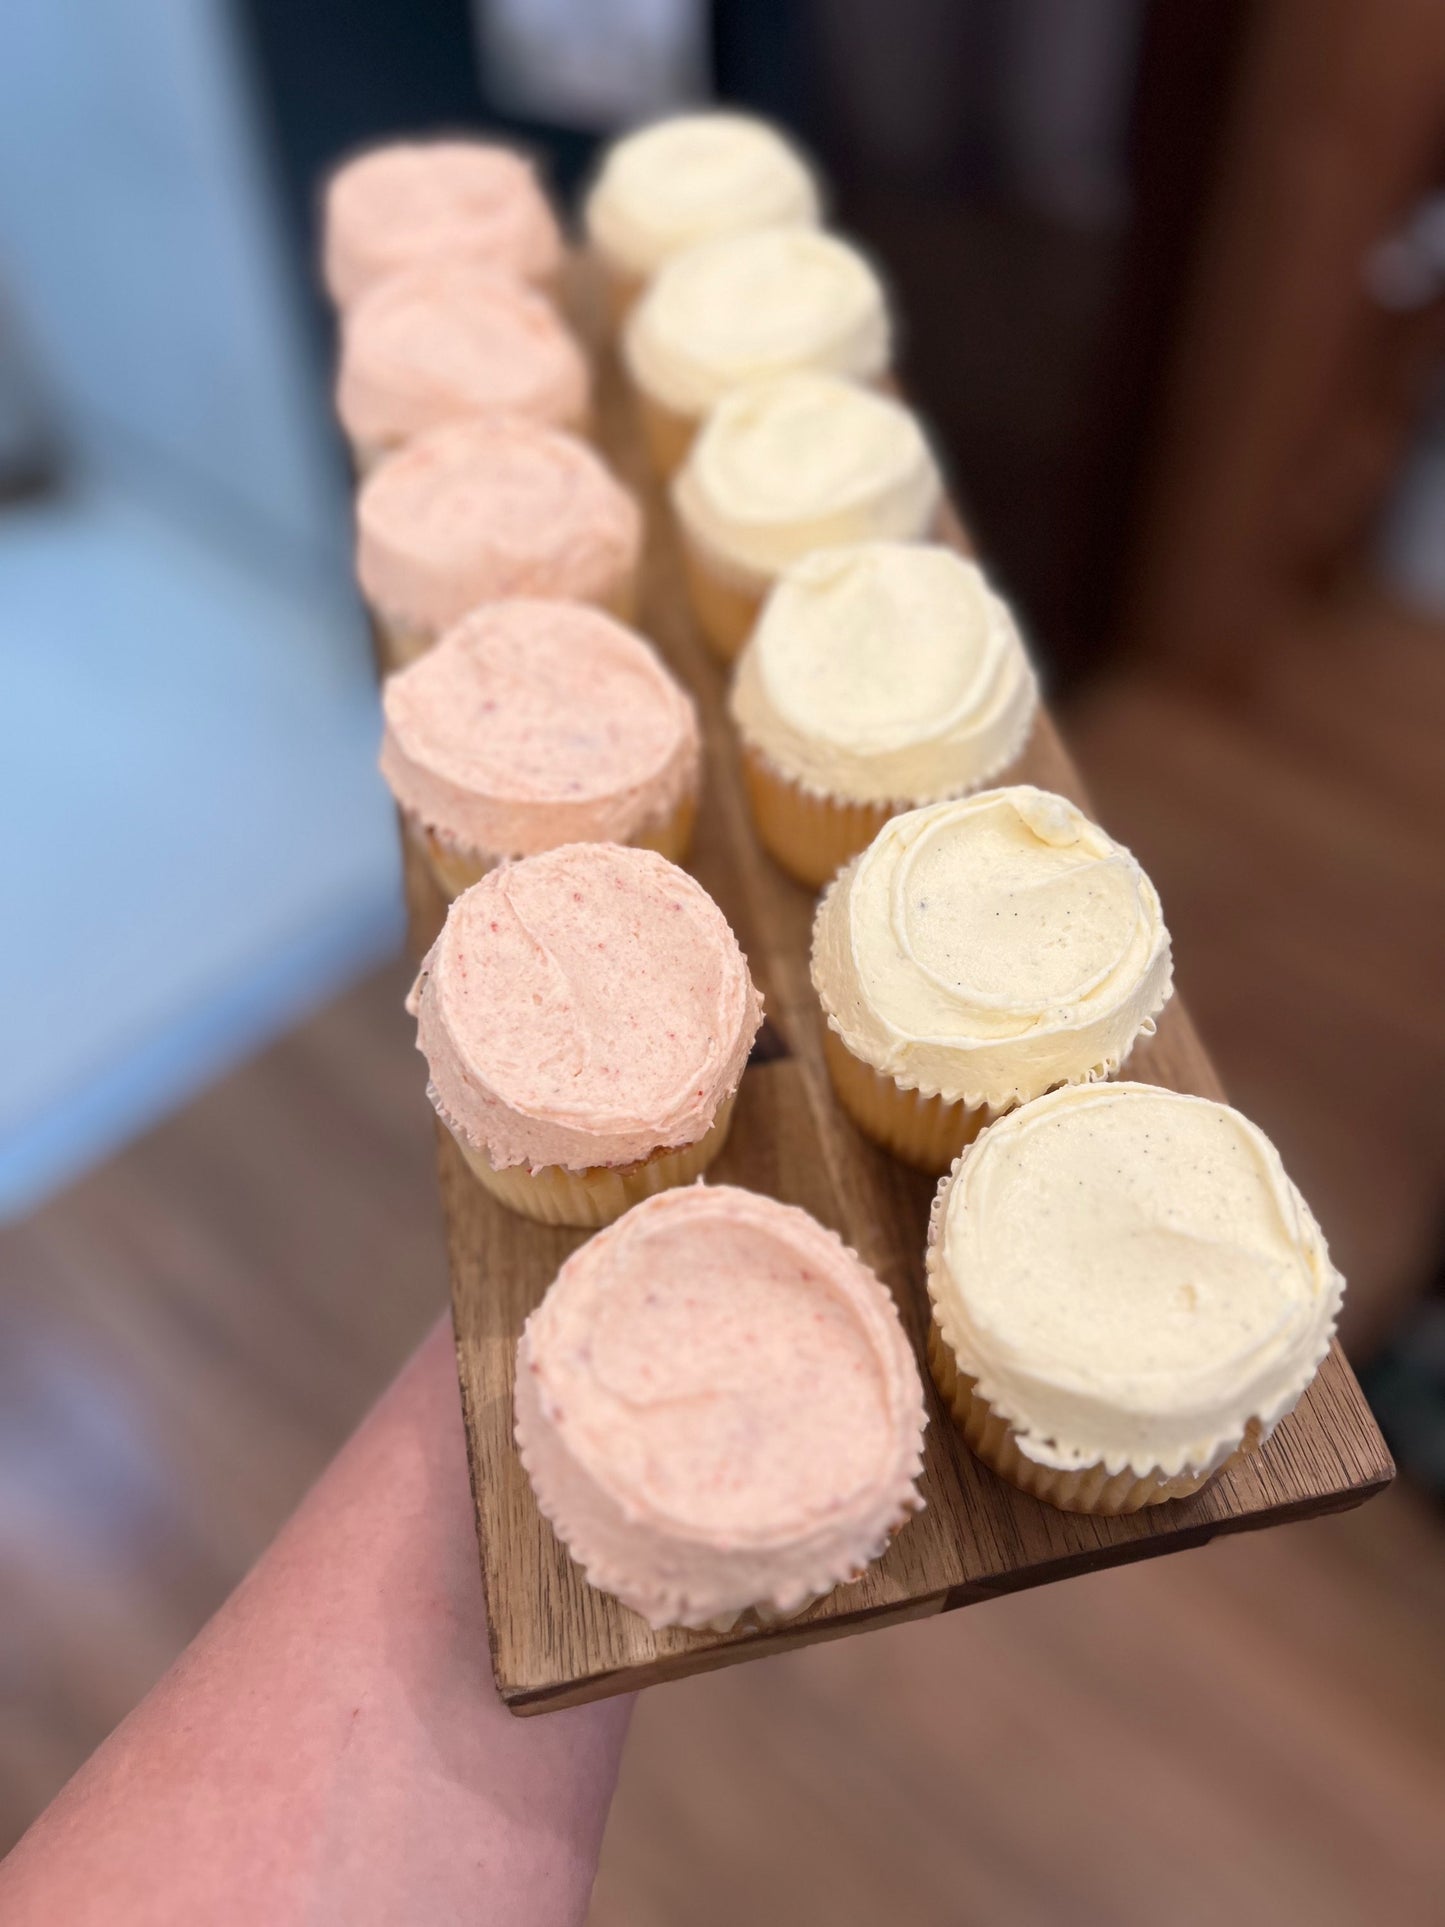 Natural flavoured iced cupcakes